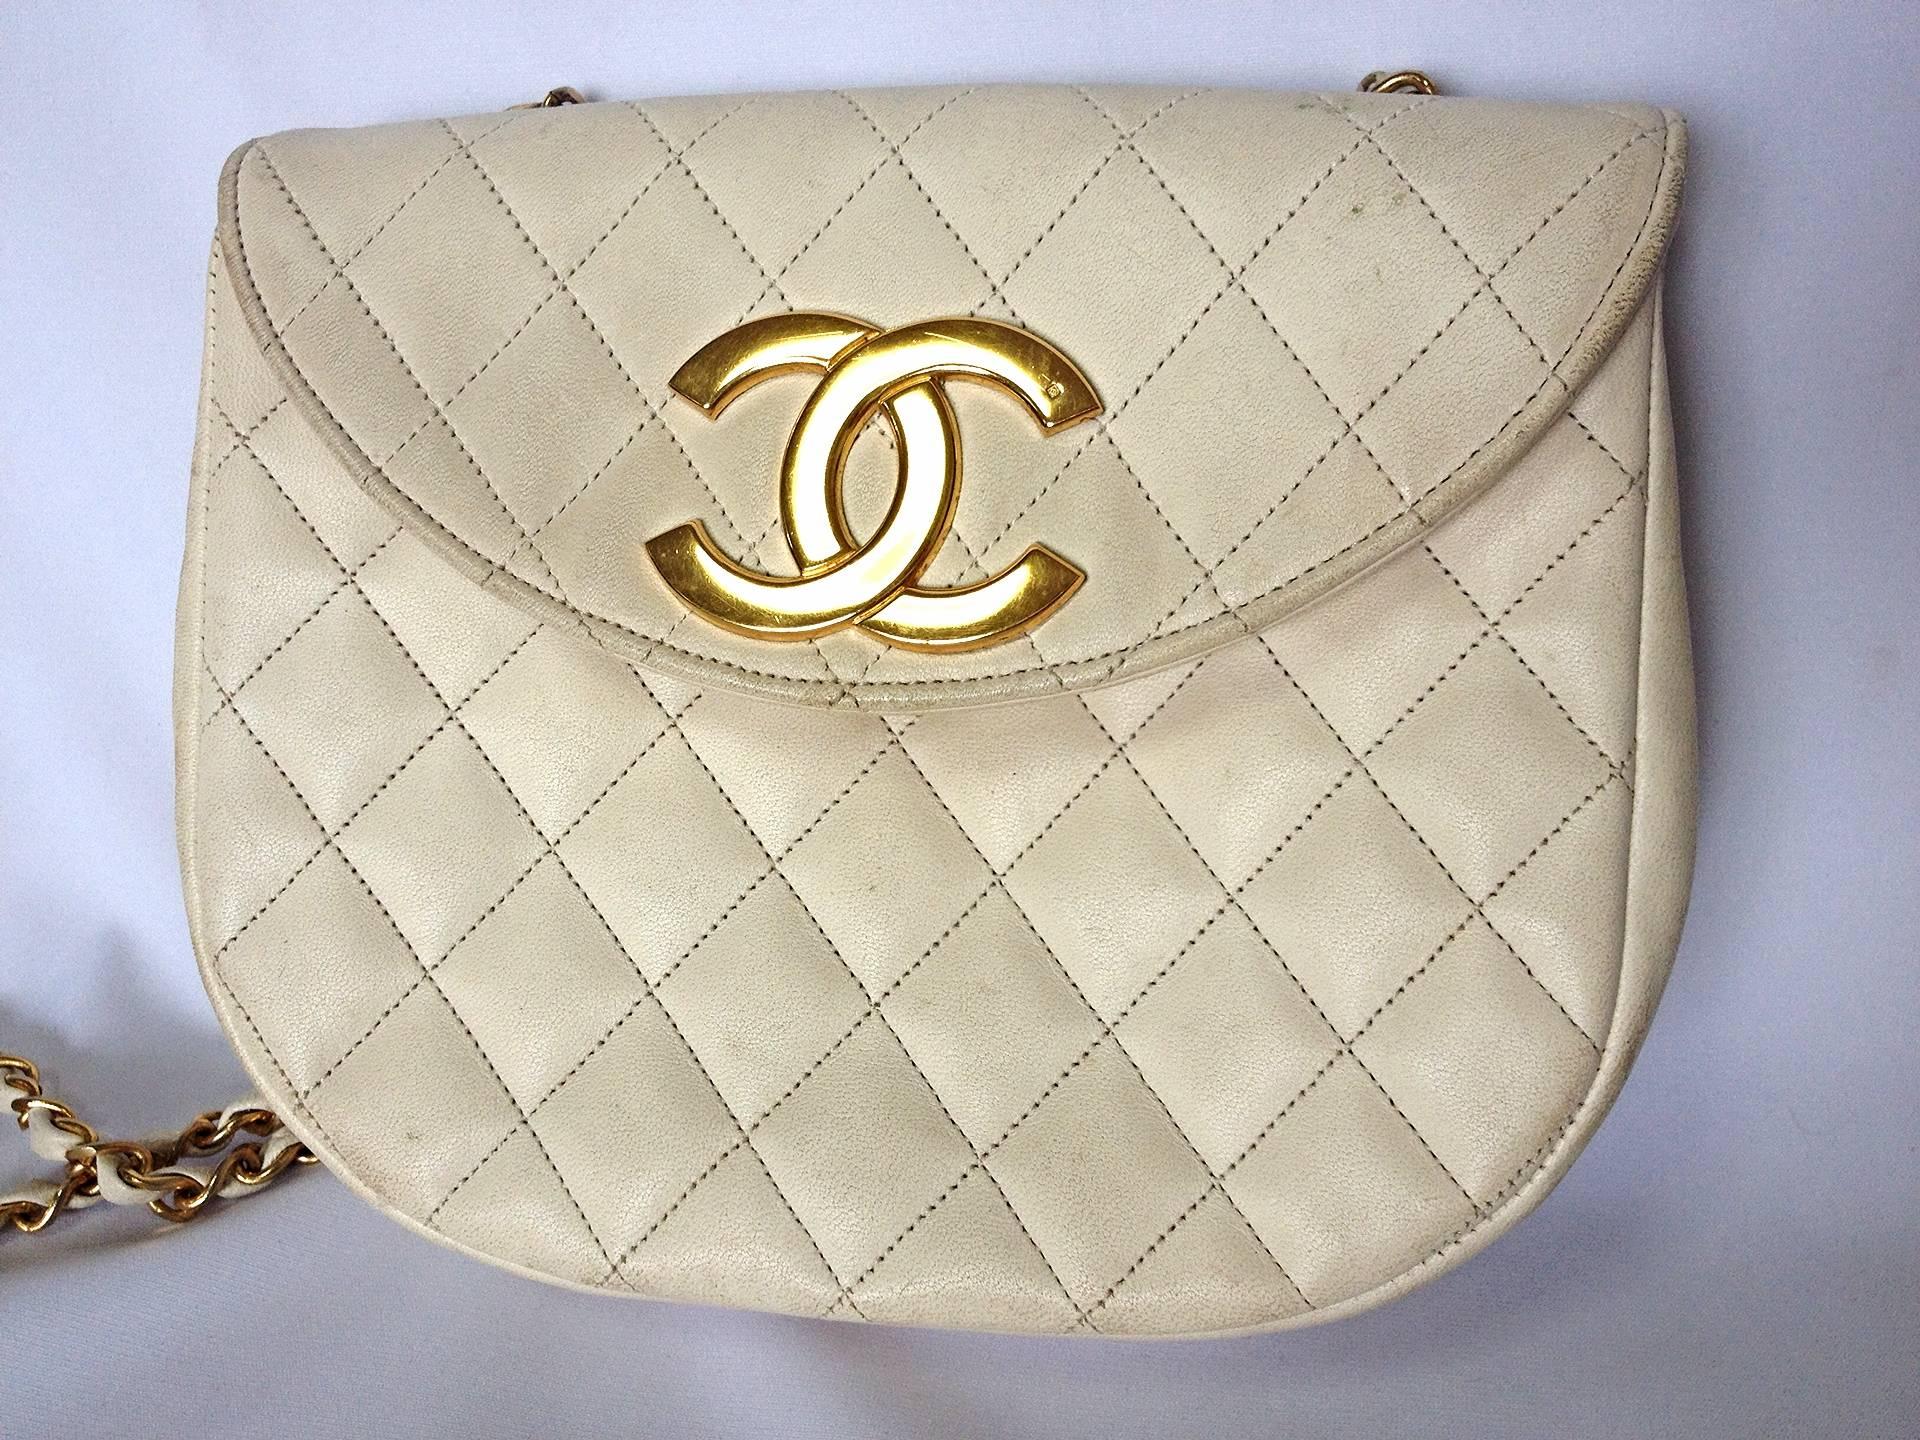 80's Vintage CHANEL ivory white quilted lambskin shoulder purse with large golden CC oval flap and chain strap.

Here is another rare piece, a hard-to-find vintage treasury bag from Chanel from the 80's.

The unique thing about this purse is its